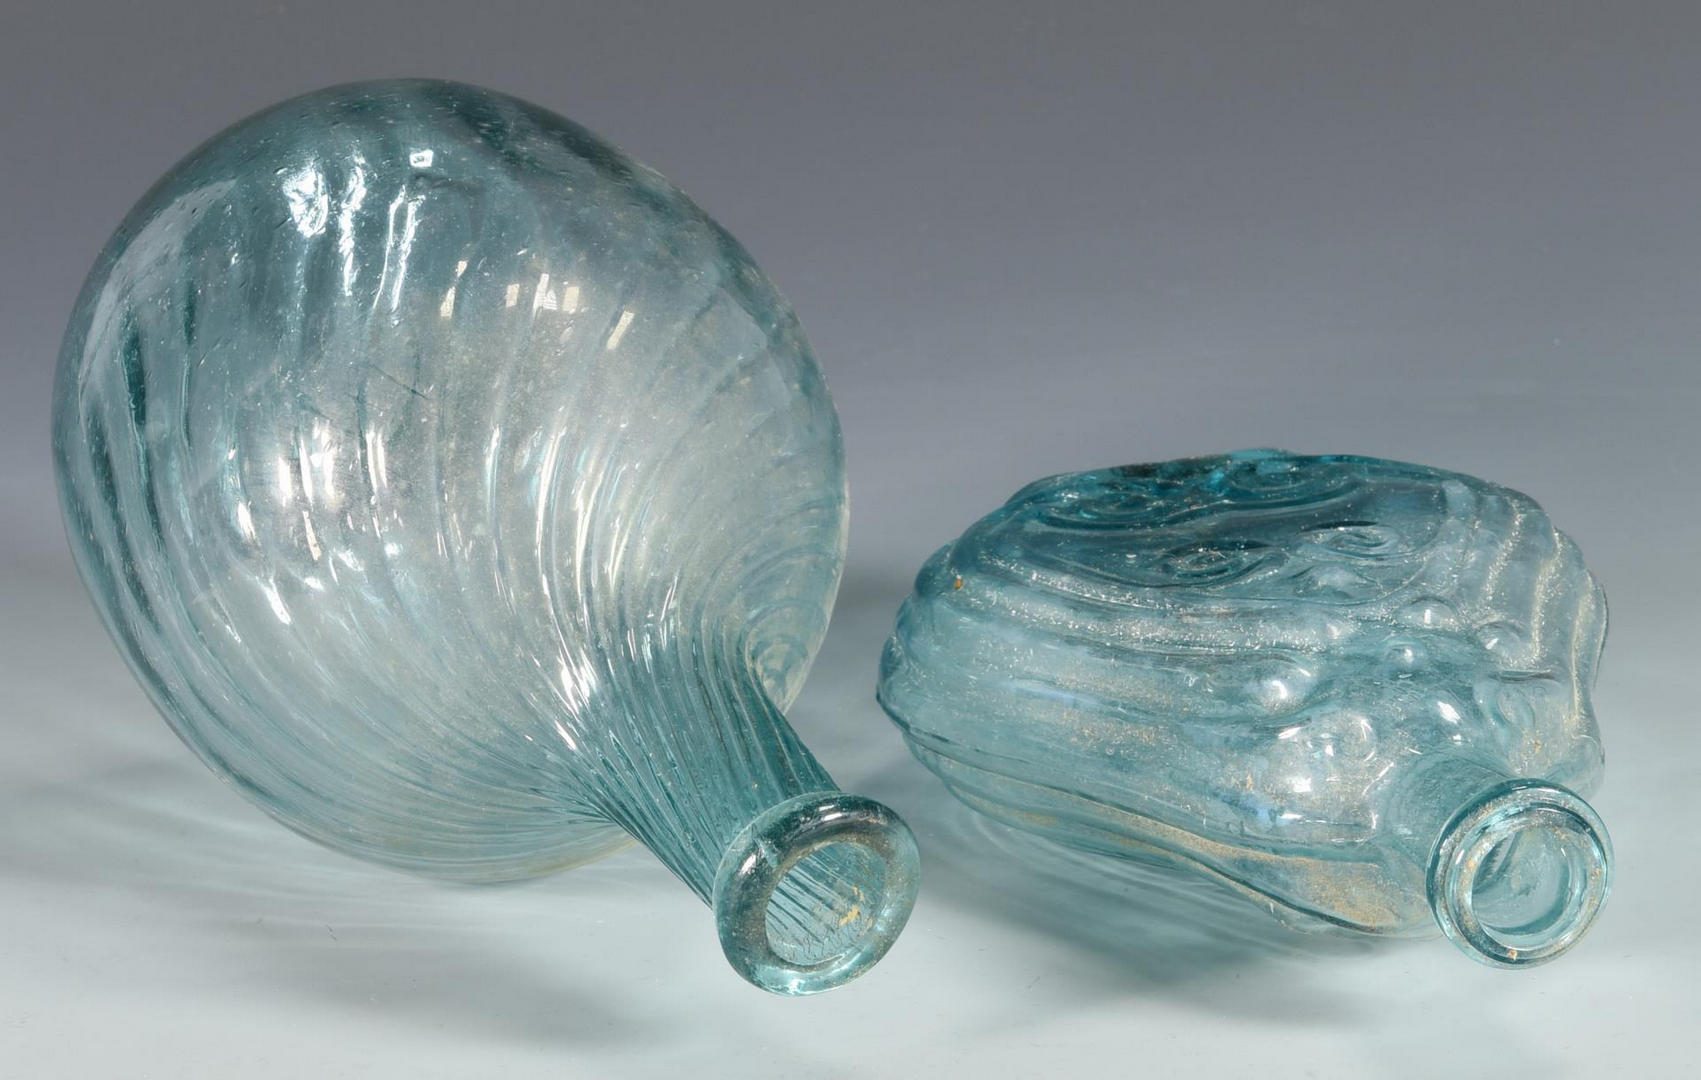 Lot 680: 6 Early American Glass Items